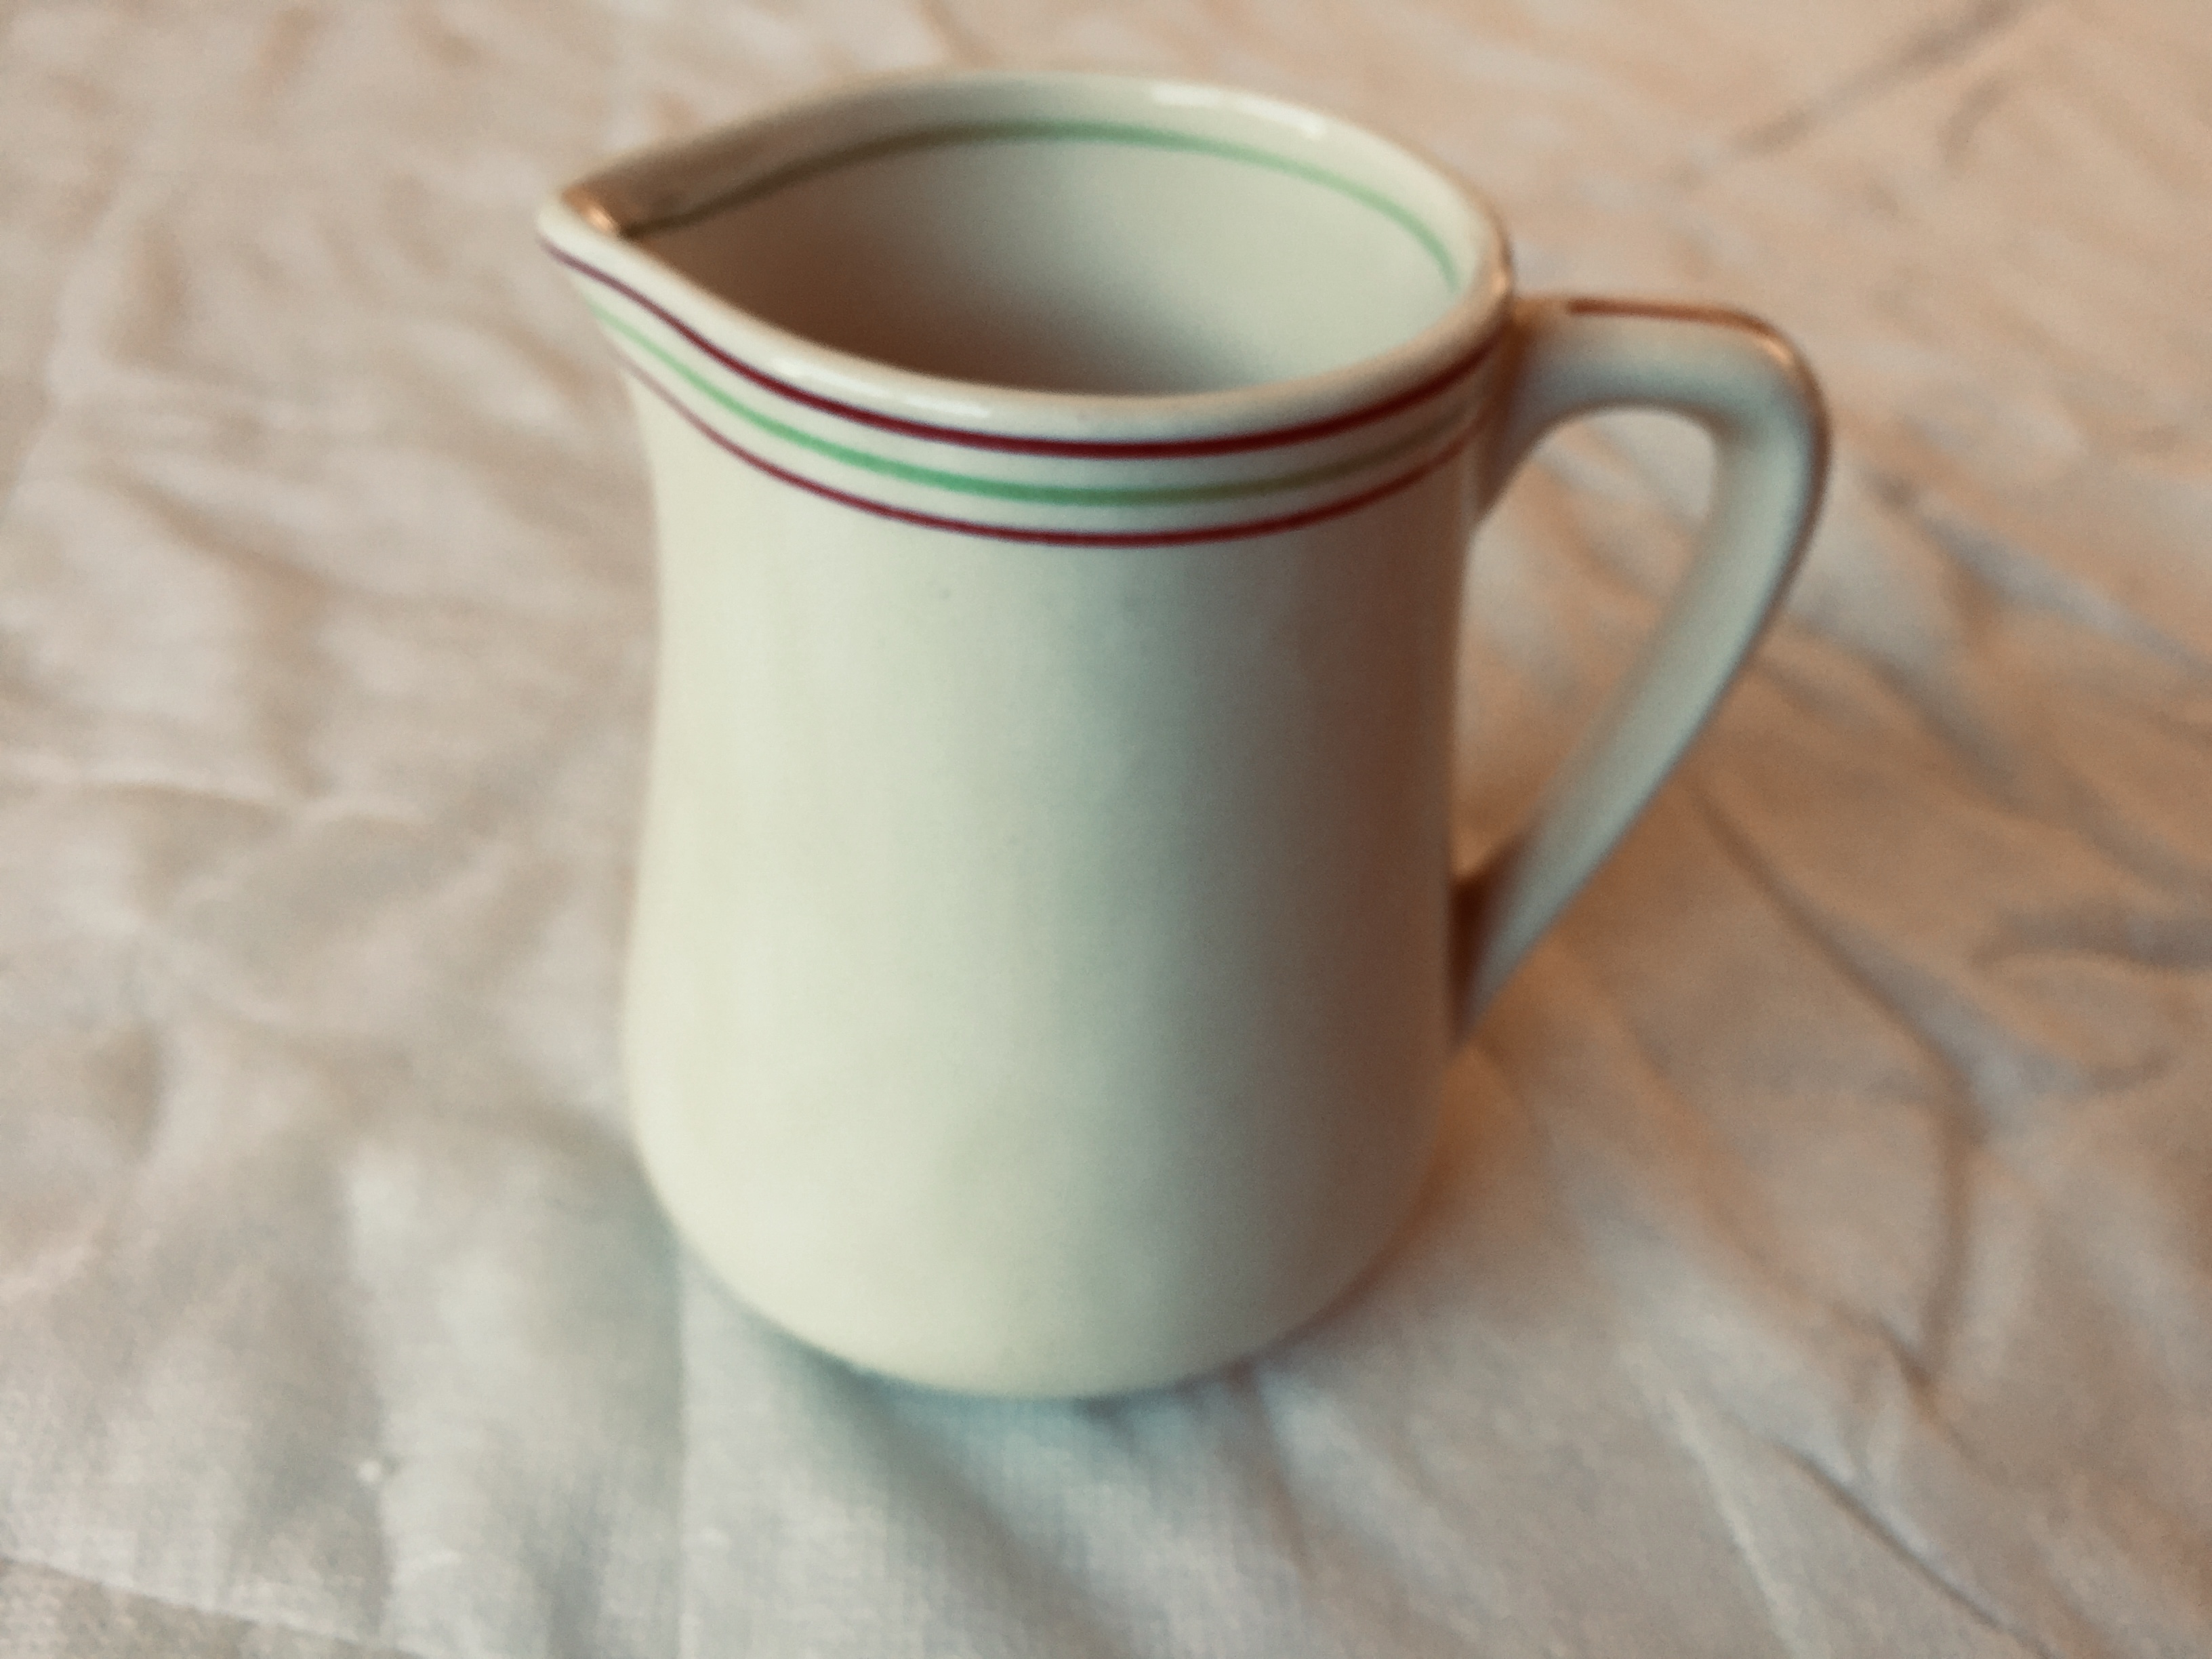 AS USED ON BOARD P&O LINE MILK JUG FROM THE 1960's